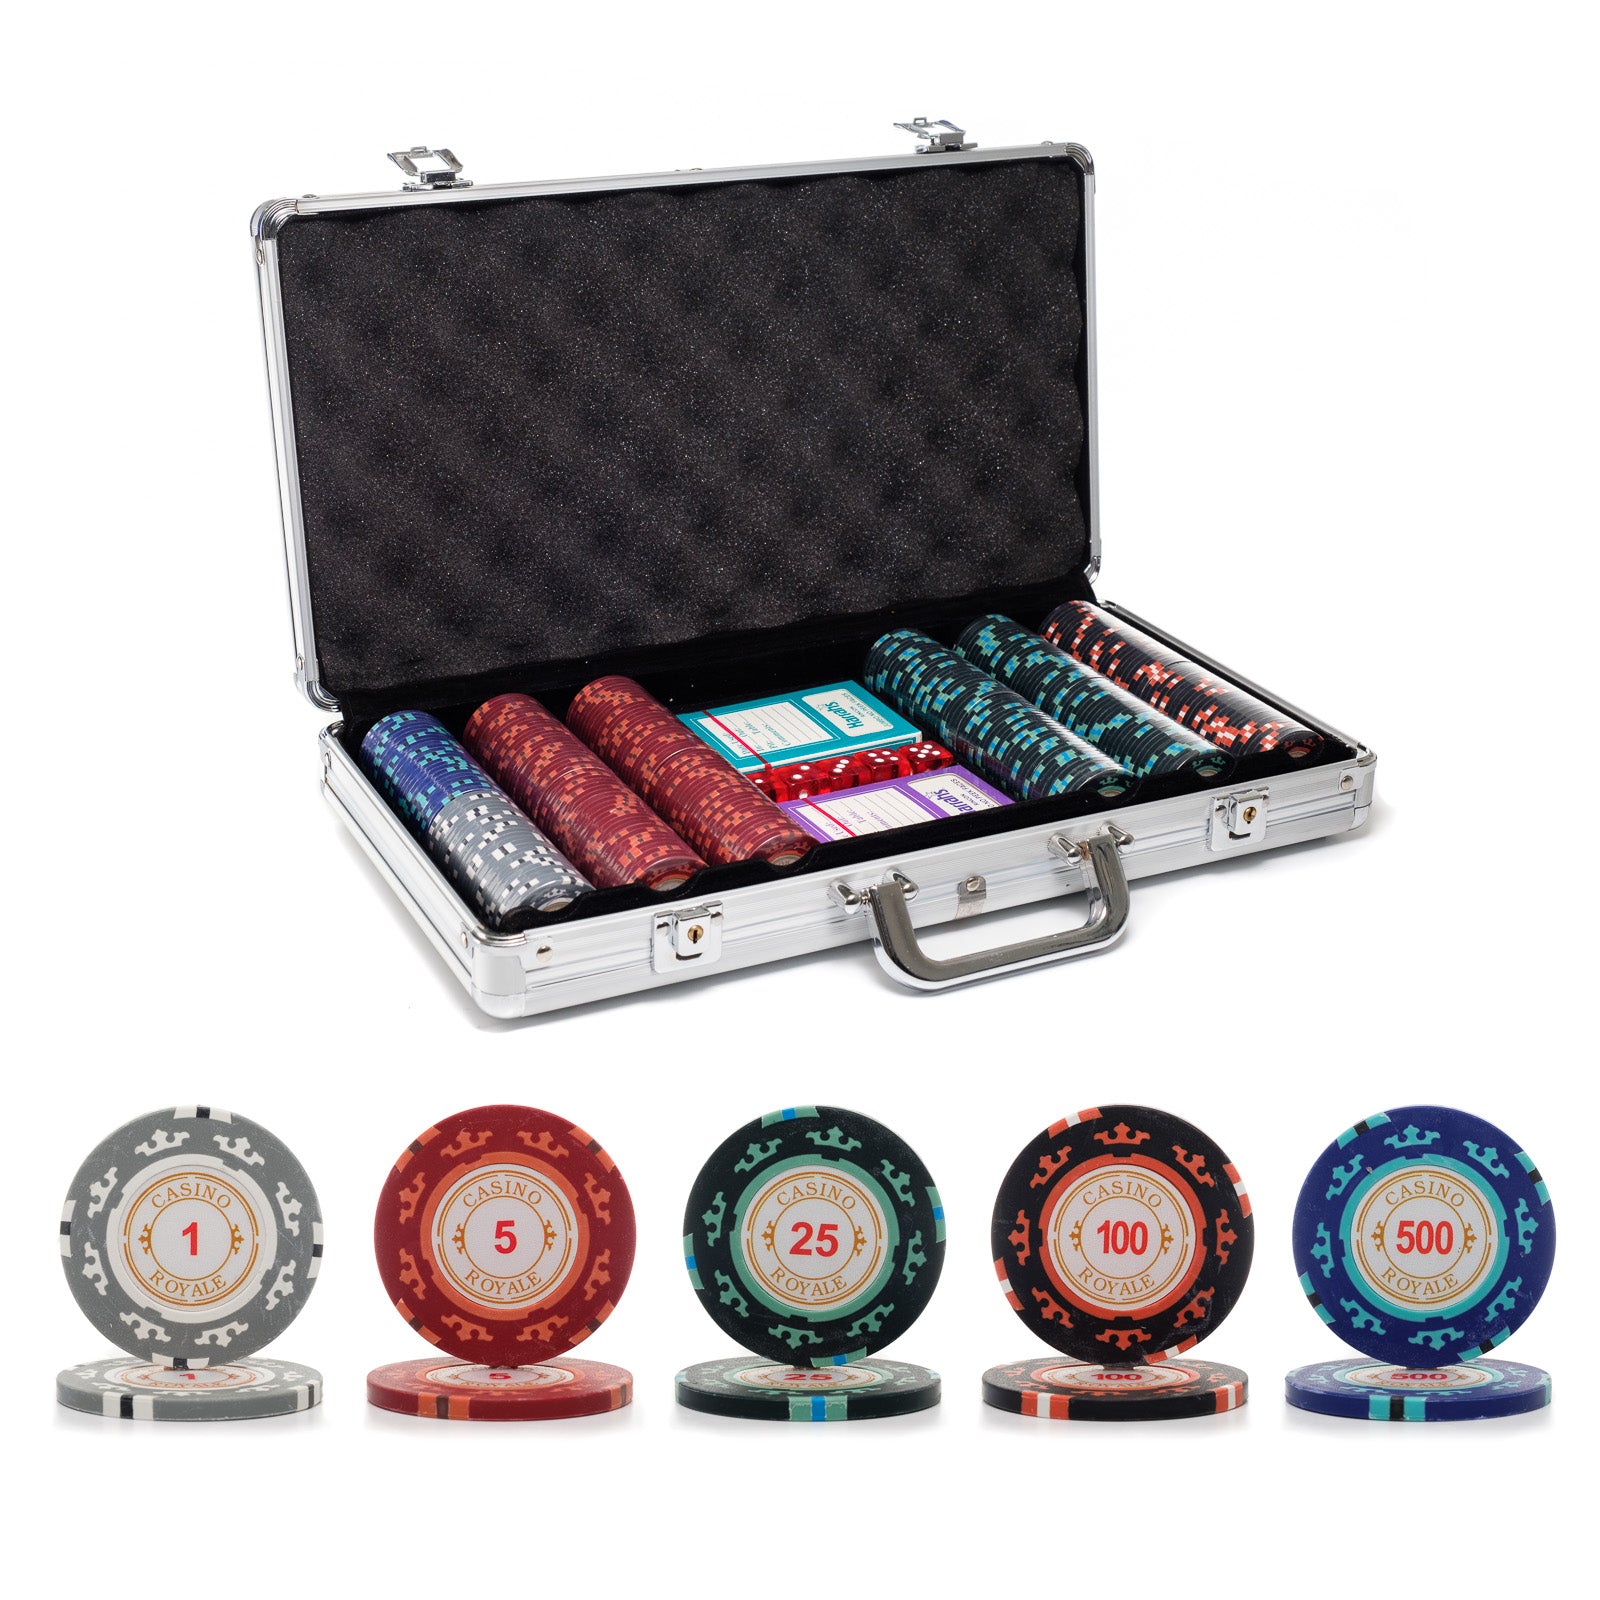 PLAYWUS Casino Poker Chip Set, 300 PCS Poker Chips with Aluminum Case,11.5  Gram Chip with Iron Inser…See more PLAYWUS Casino Poker Chip Set, 300 PCS